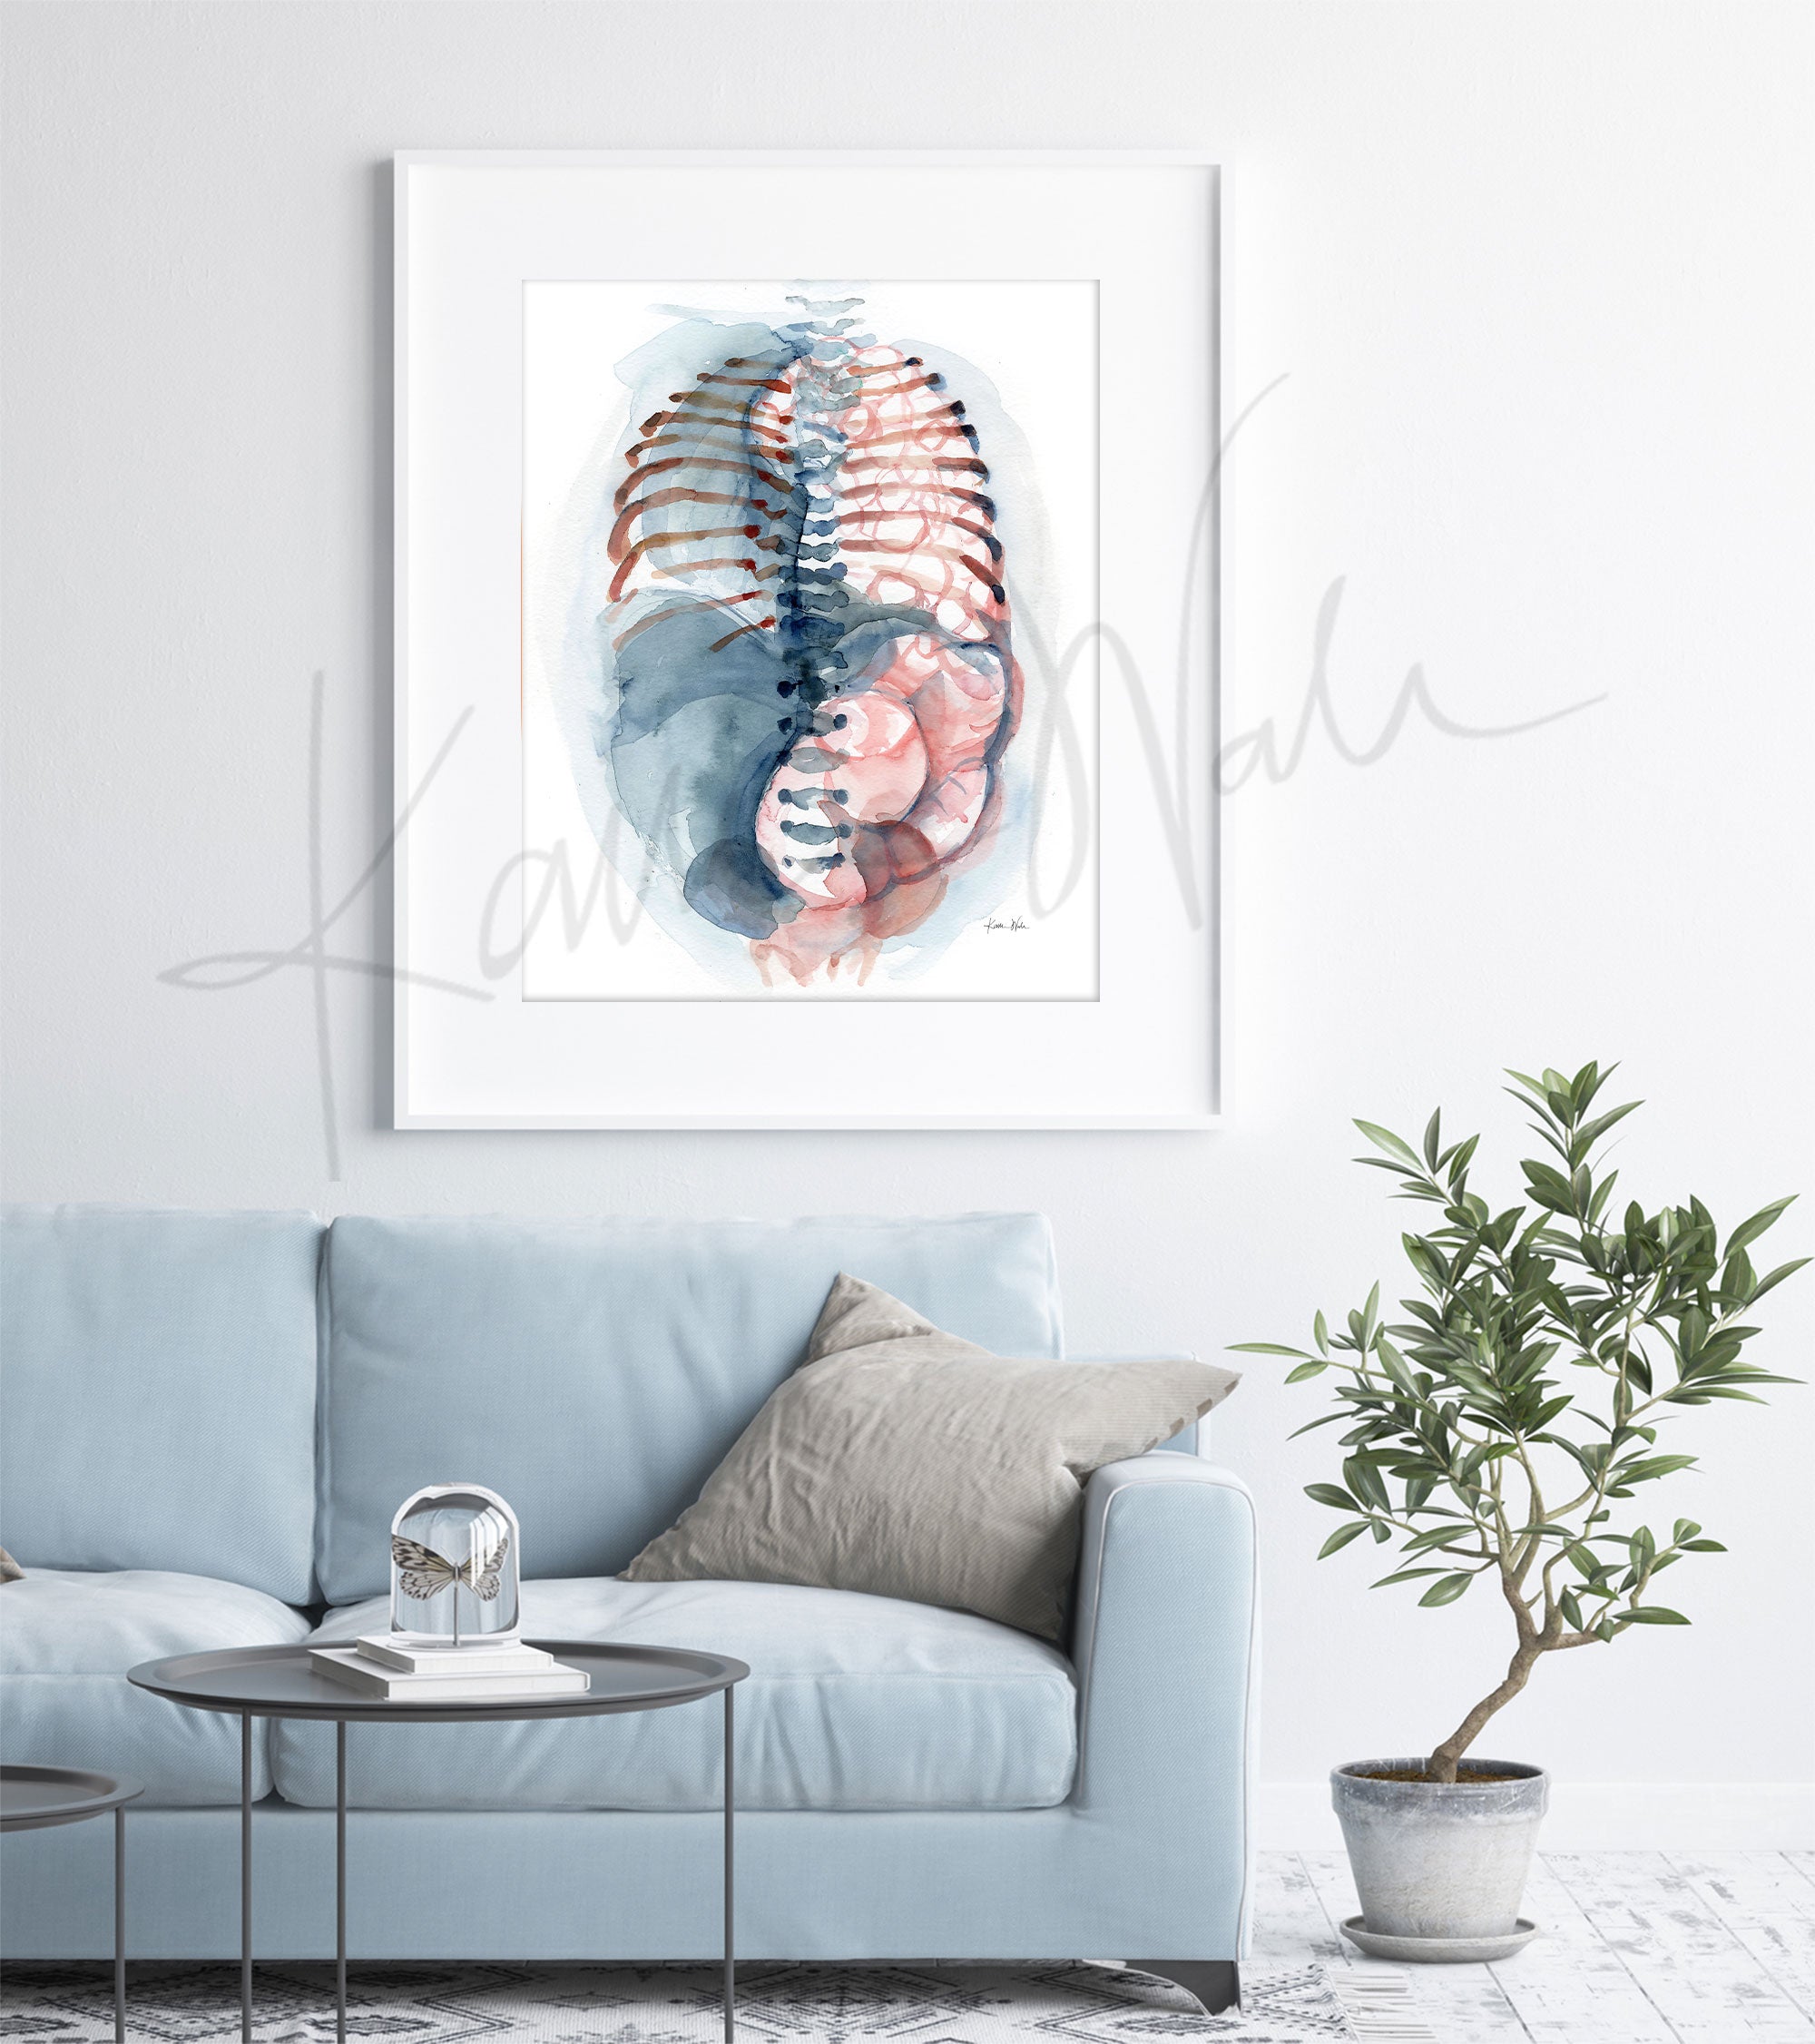 Framed watercolor painting of a diaphragmatic hernia. The painting is hanging over a blue couch.